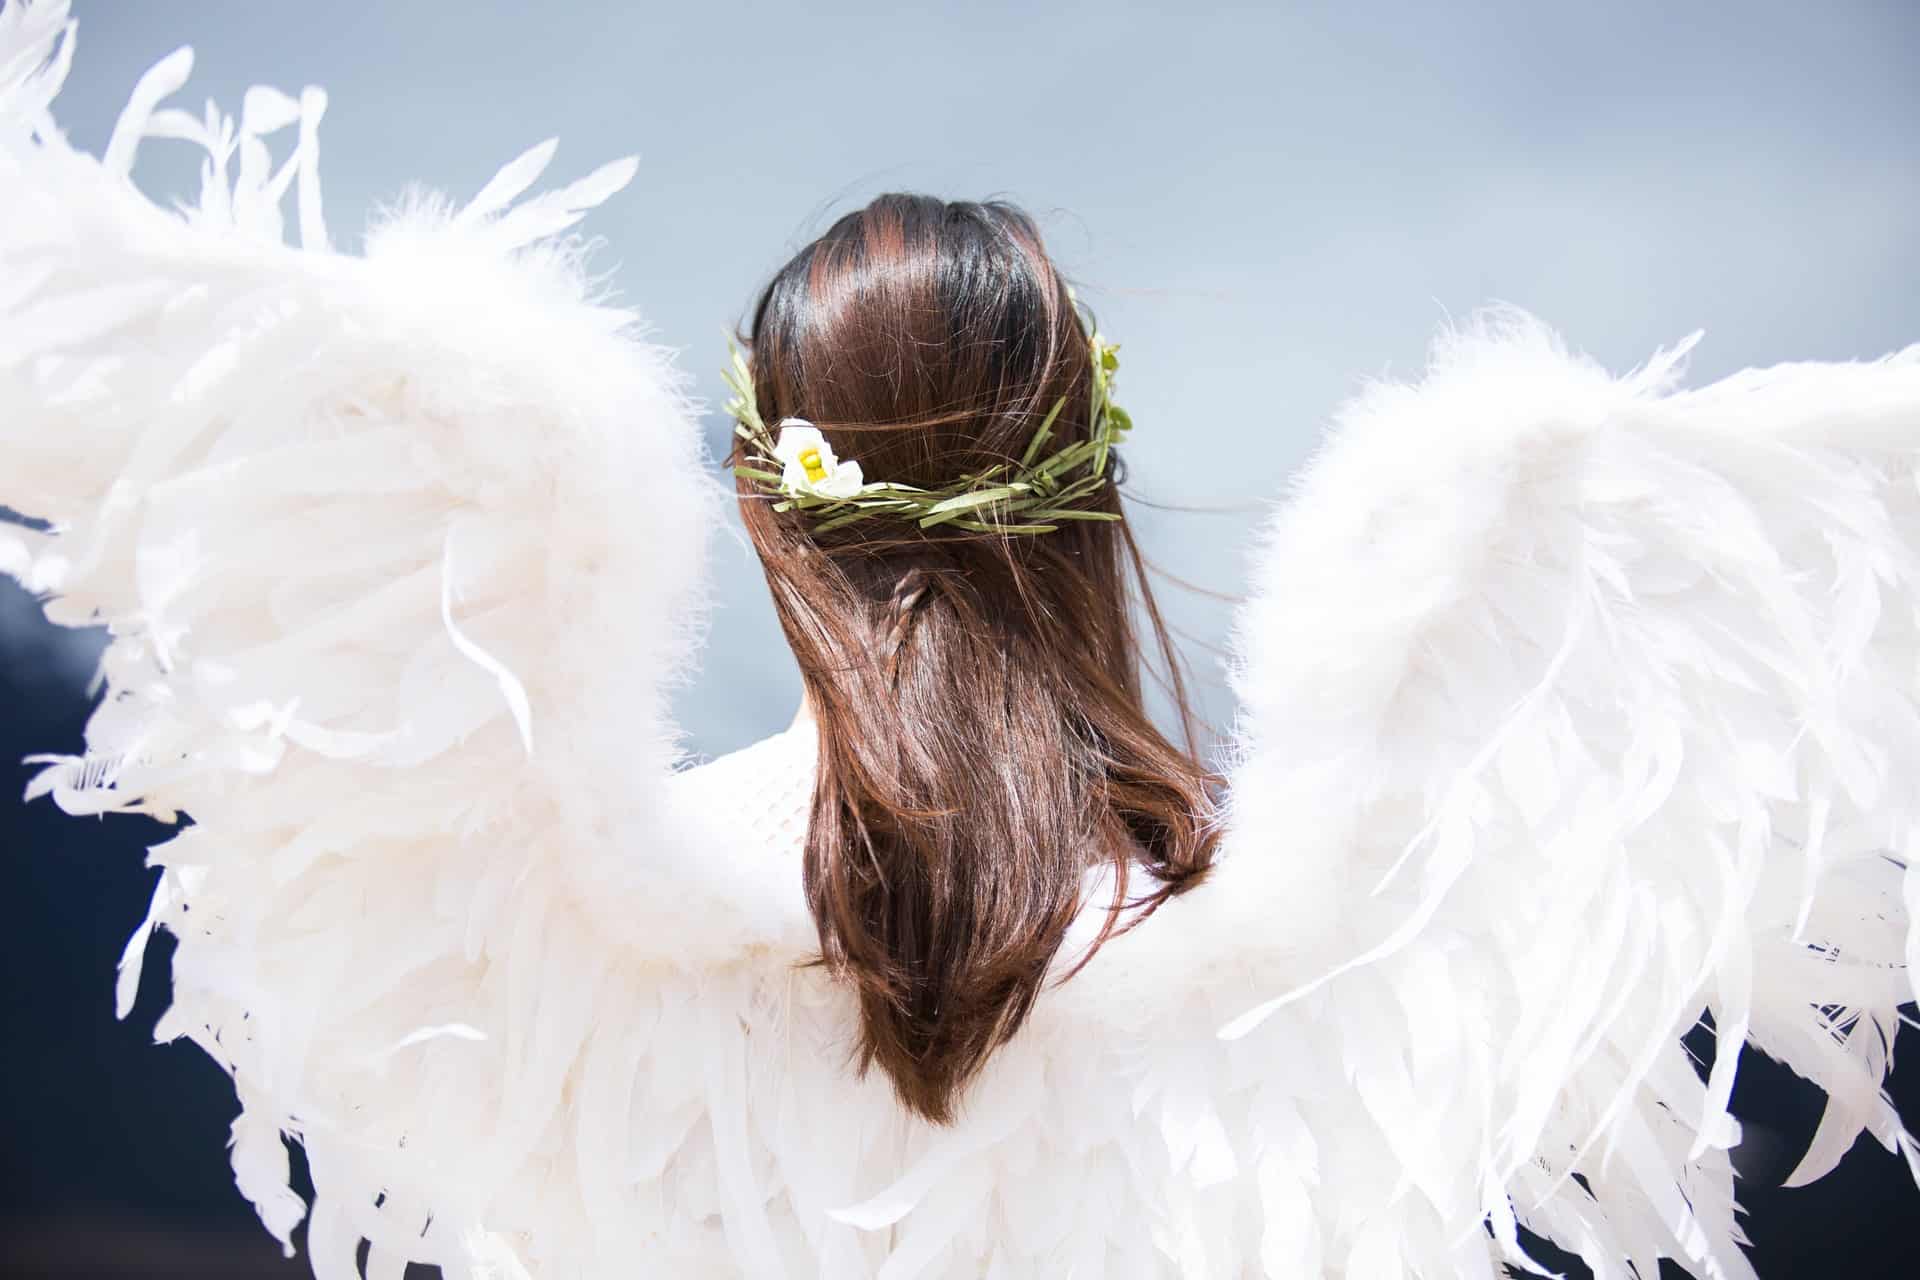 Worried about getting seed money for your startup? Read our article to find out how angel investors can help you launch your dreams.